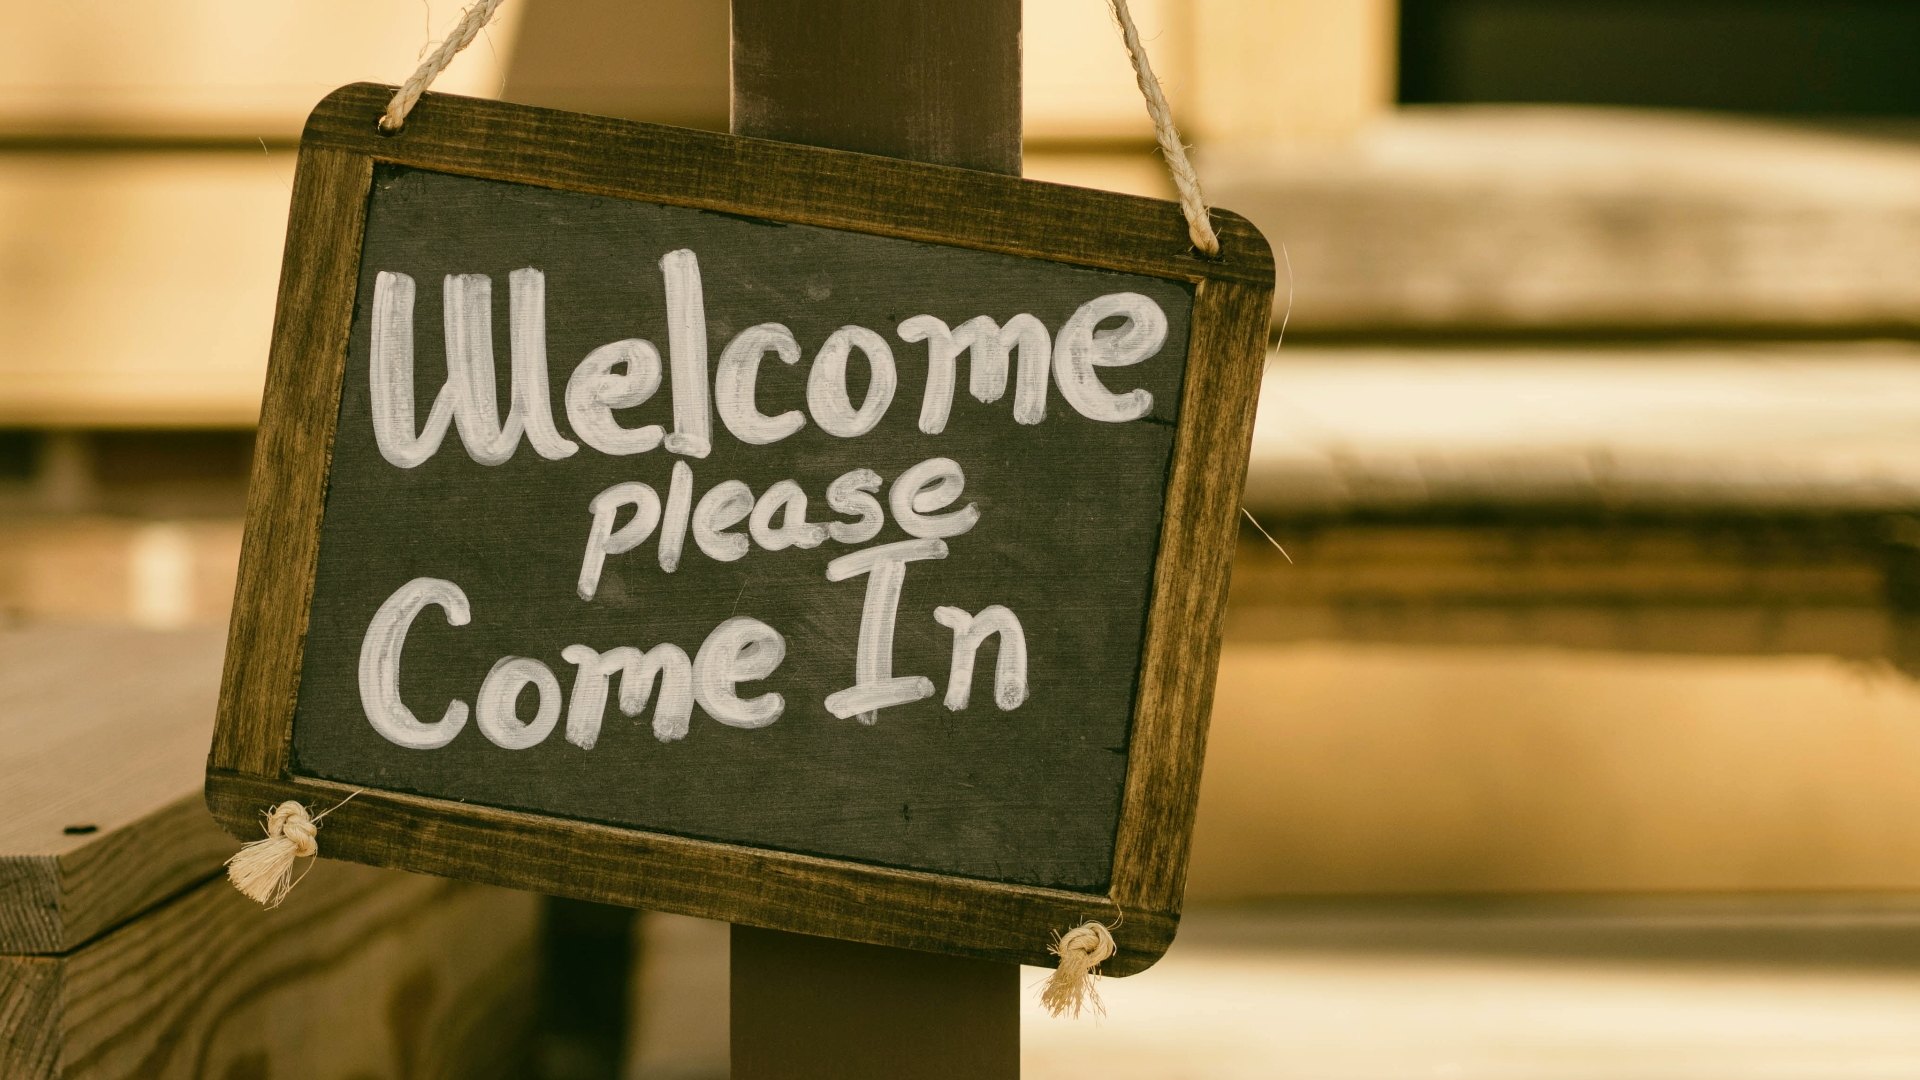 A sign with the text "Welcome, please come in."